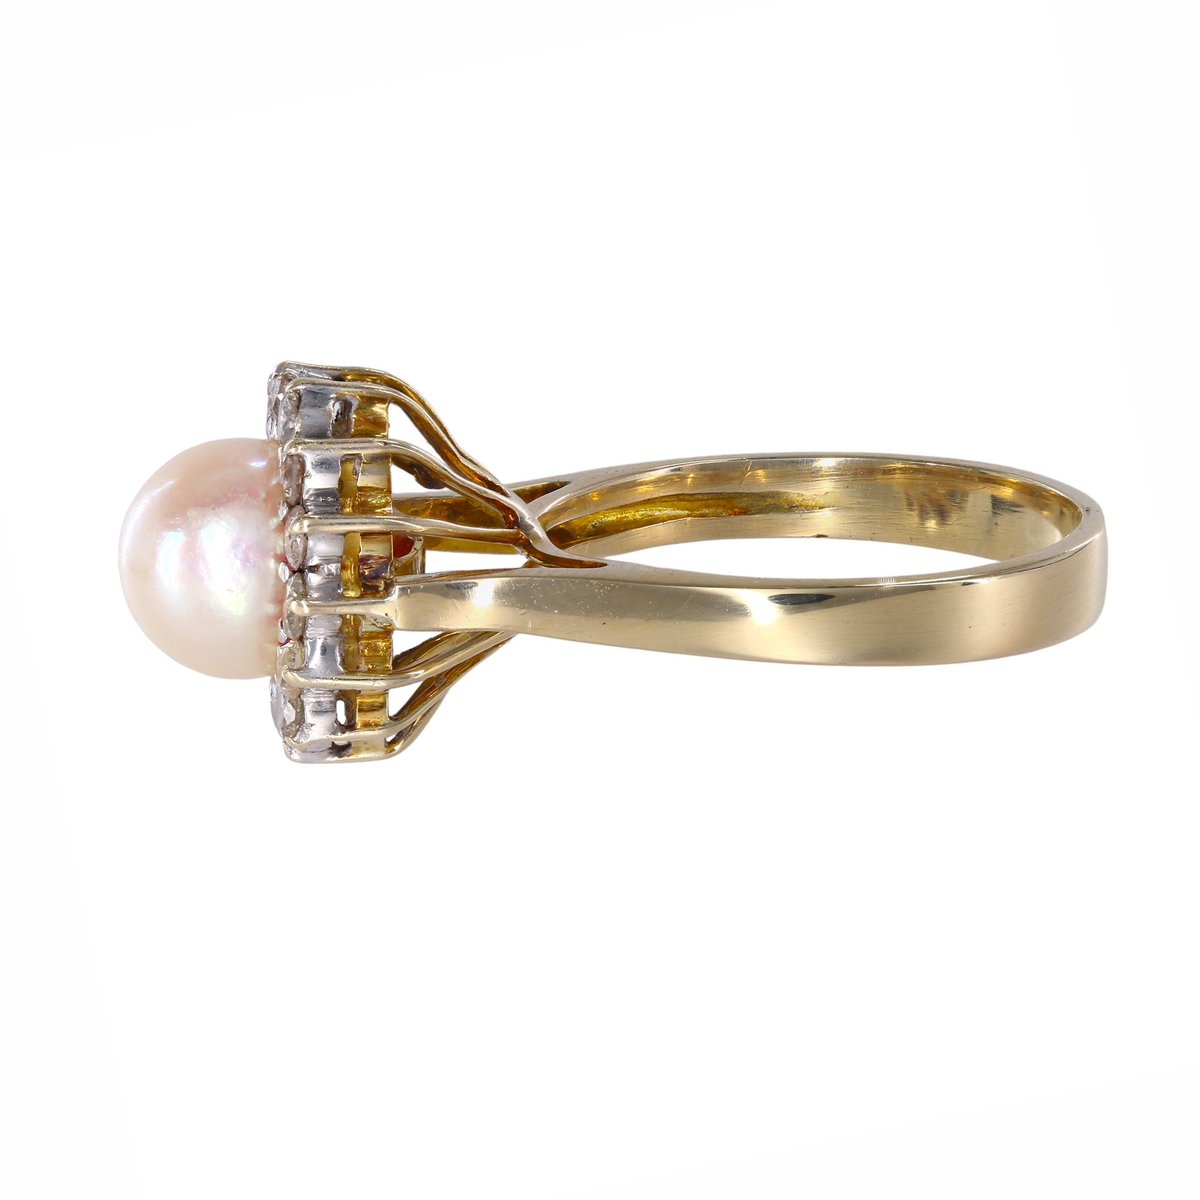 ✨ This 14k yellow gold cocktail ring showcases a stunning 6.5mm freshwater pearl surrounded by 14 dazzling diamonds. 💍✨30% Off, Final price: $279.99.  #GemstoneRings #GoldRings #FineJewelry #GoldCocktailRings #GemstoneJewelry #PrelovedJewelry #777Jewelry